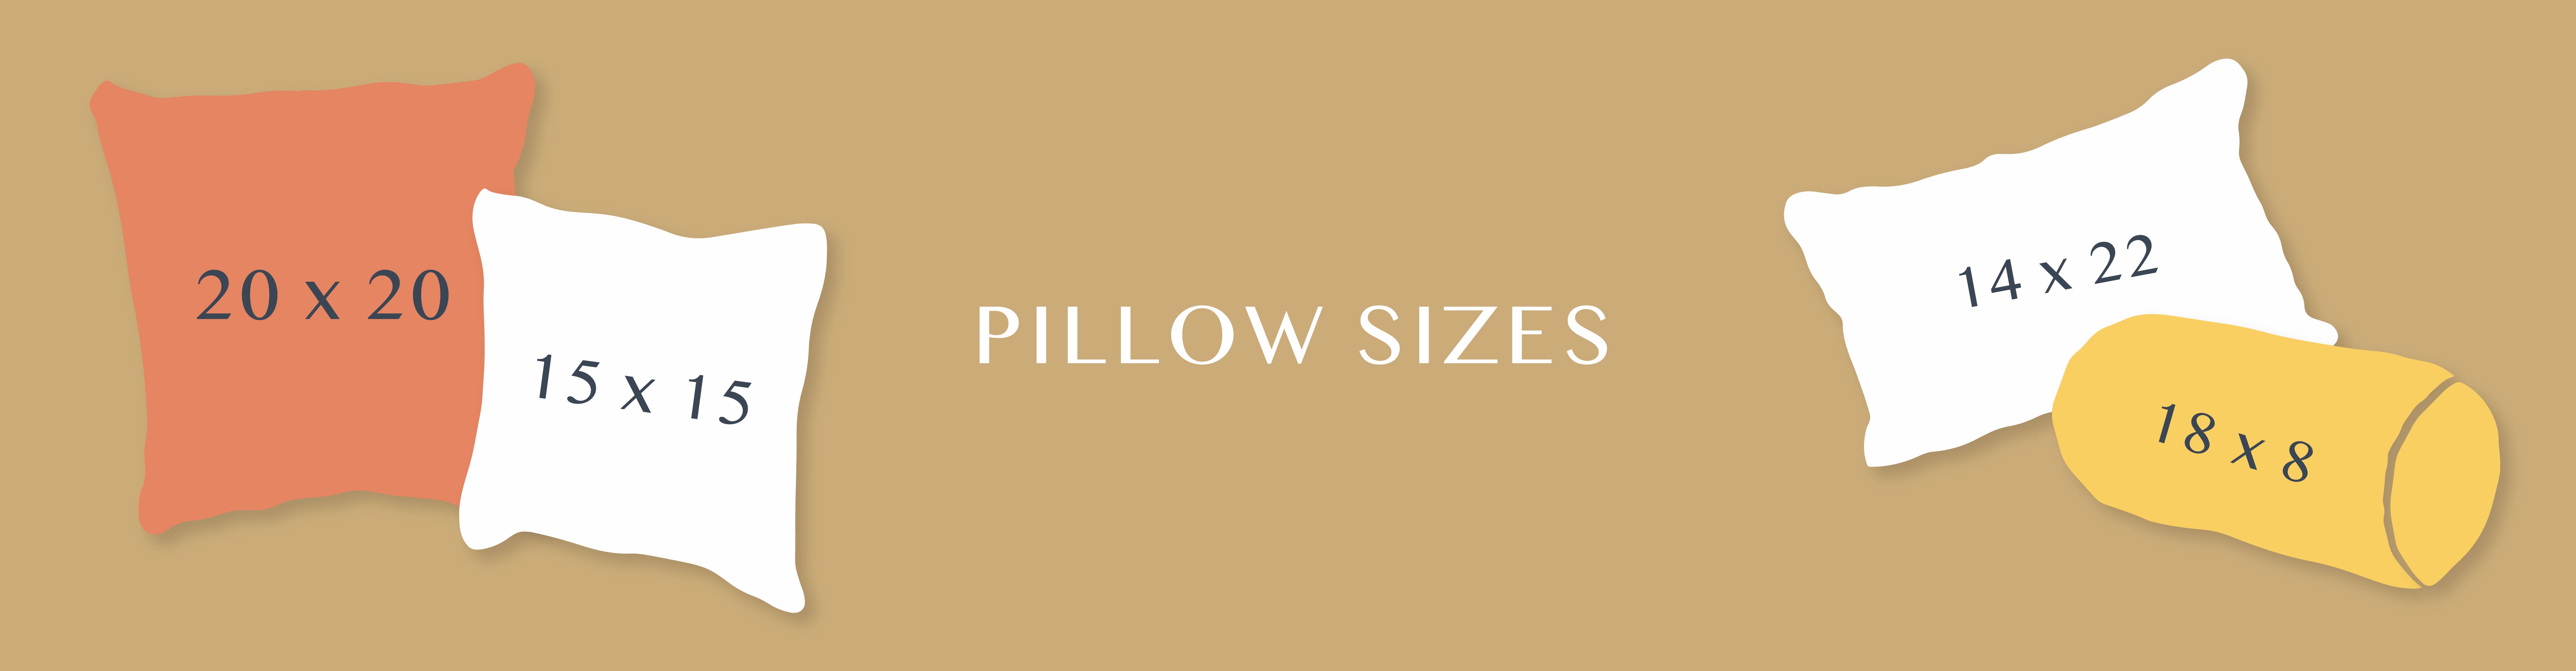 How To Choose The Perfect Throw Pillows?